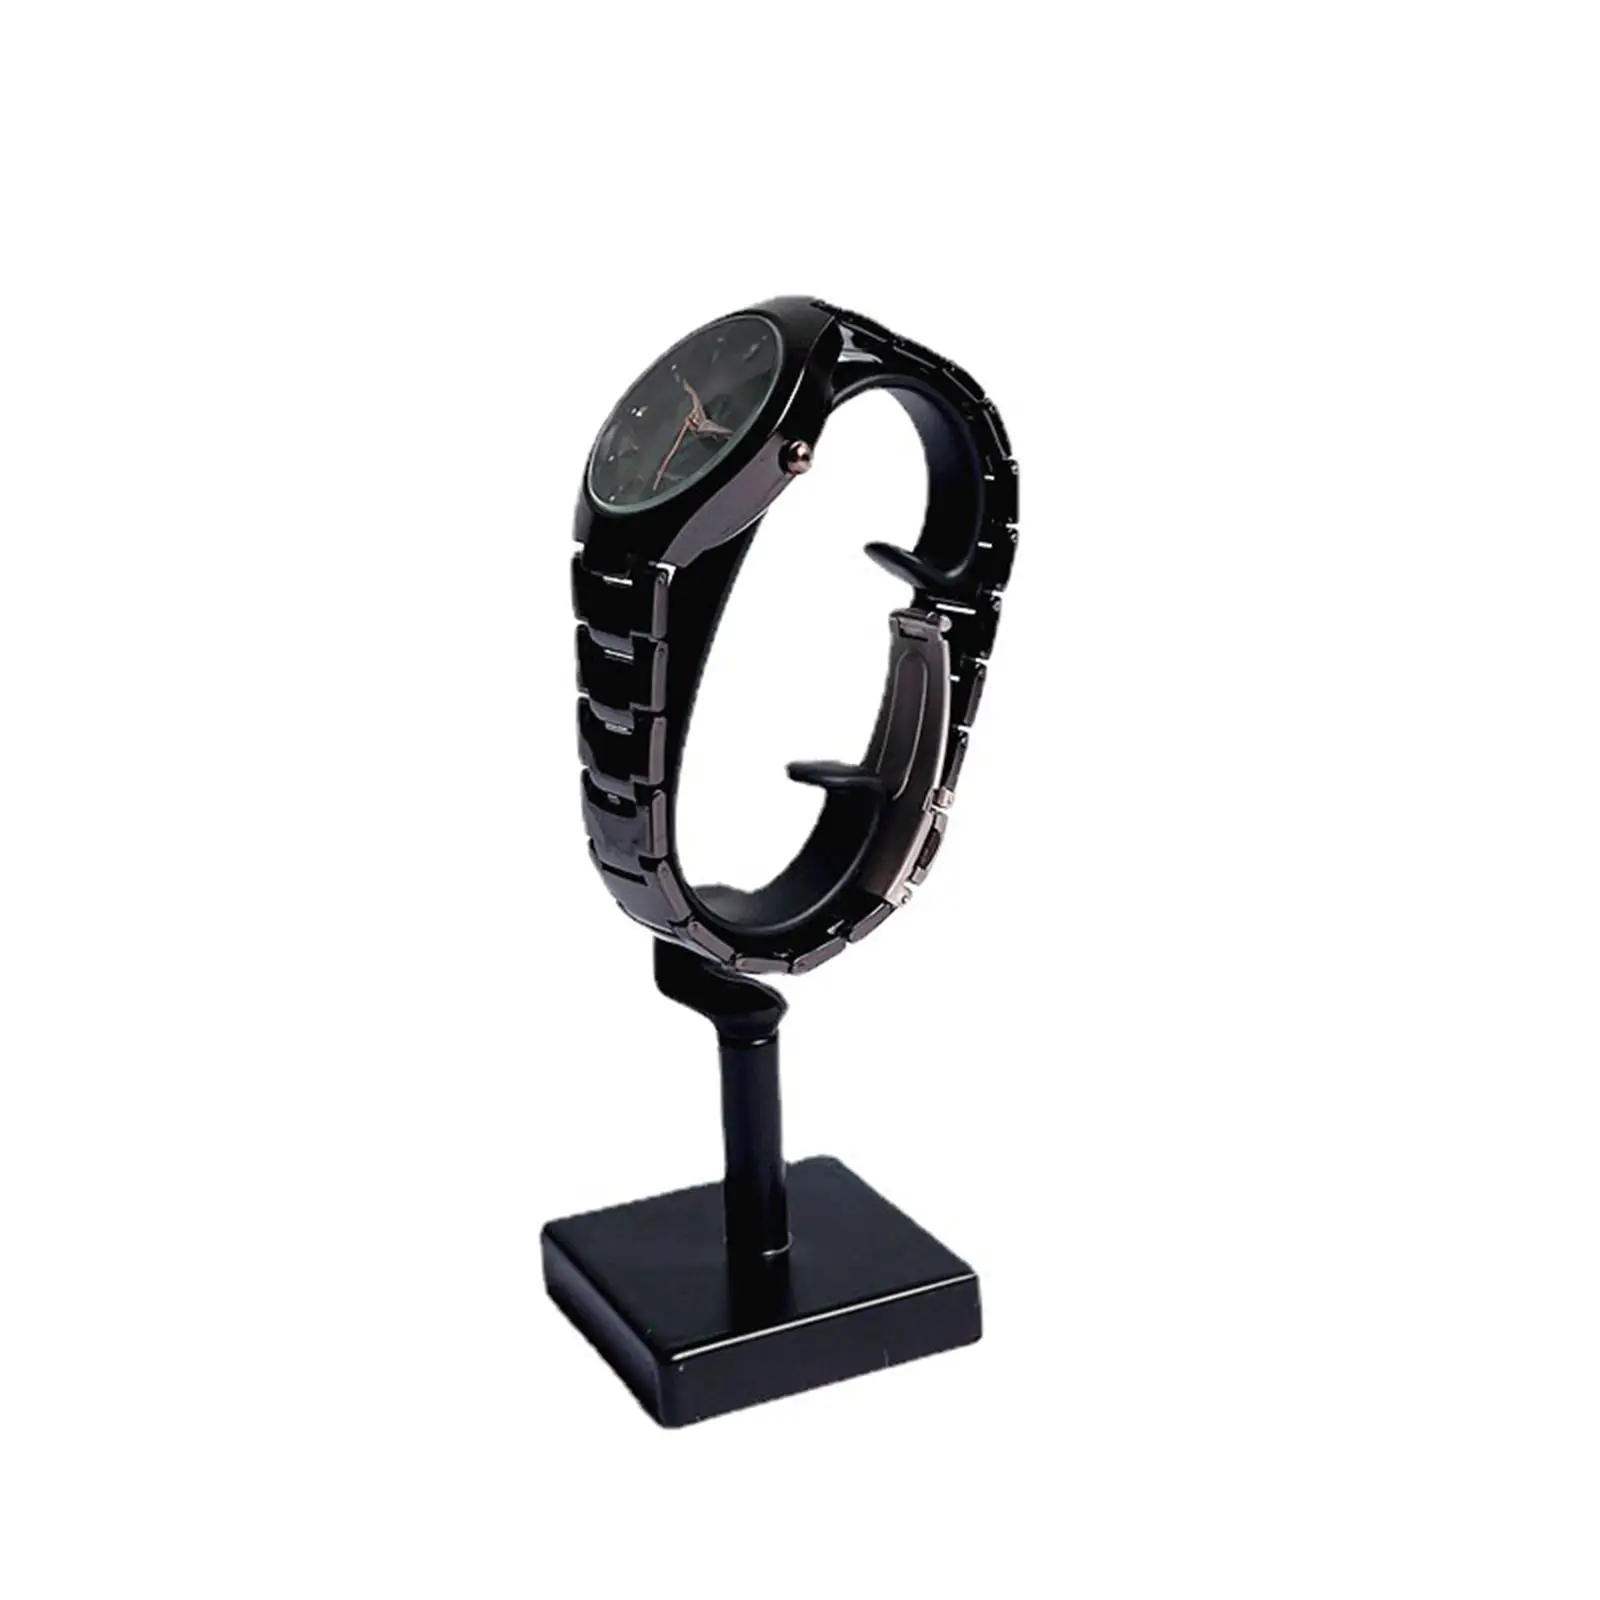 Durable Watch Display Stand Home Decor Ornament Jewelry Organizer Gift Bracelet Holder for Living Room Desktop Vanity Table Shop